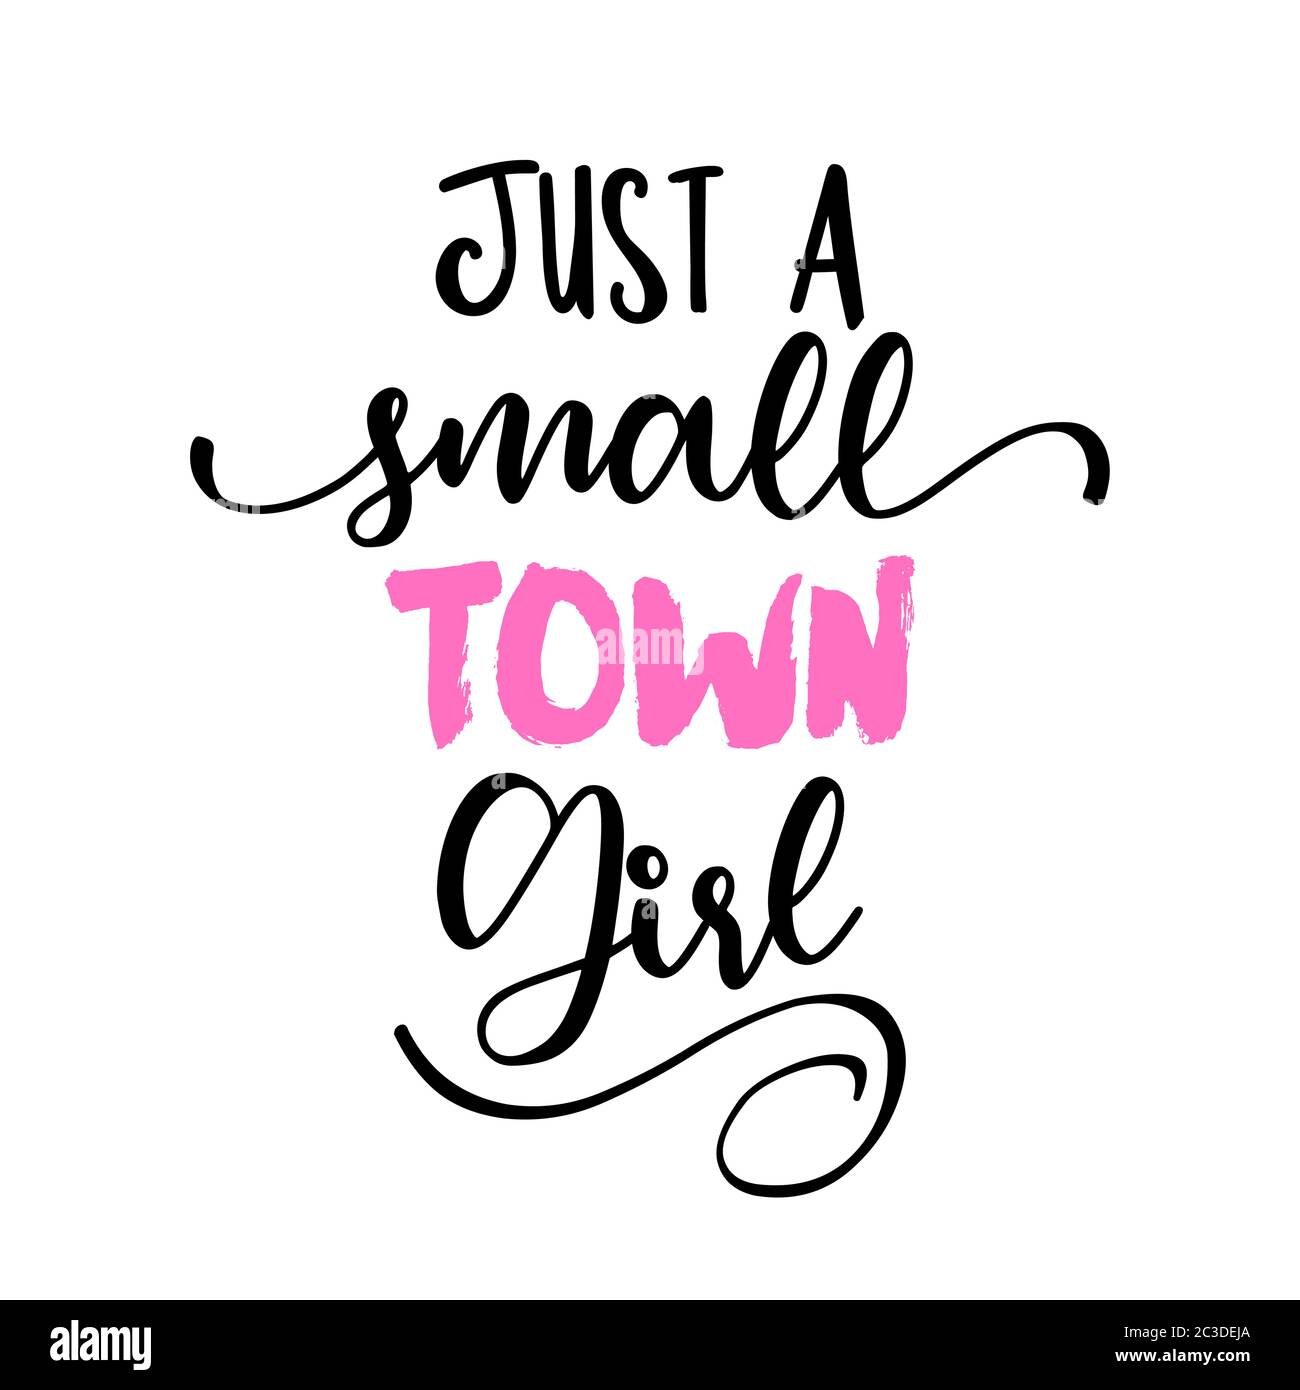 Just a small town girl - Lettering inspiring calligraphy poster with text. Greeting card for stay at home for quarantine times. Hand drawn cute sloth. Stock Vector